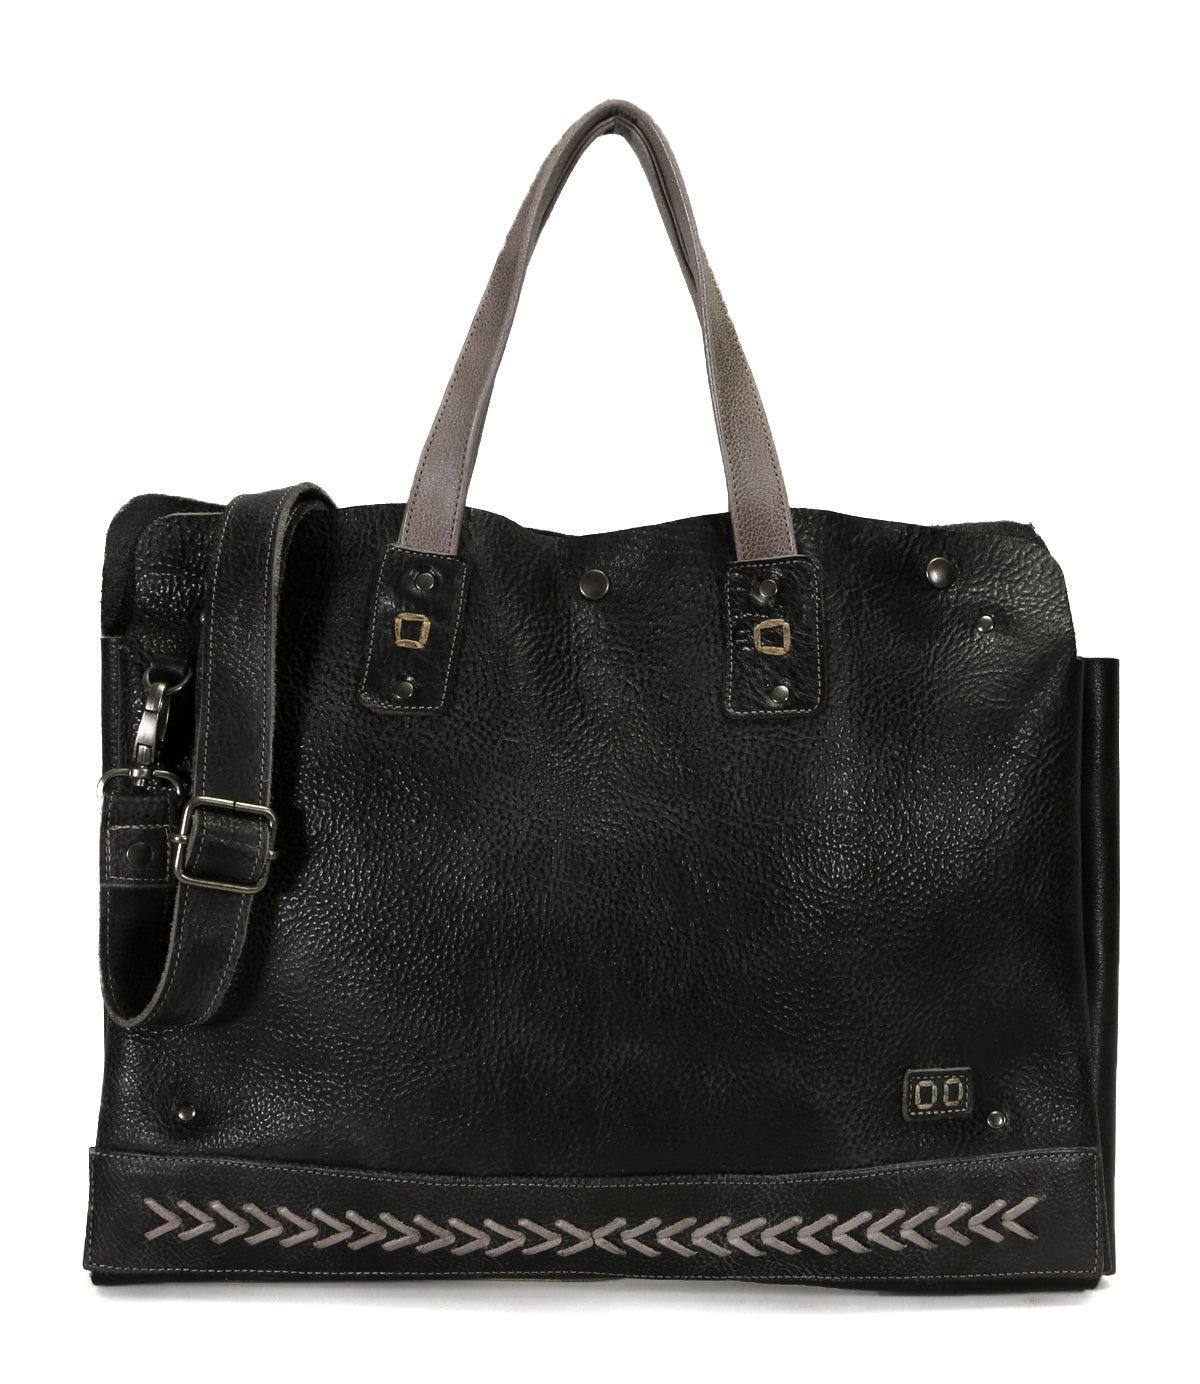 Black leather Commuter tote bag by Bed Stu with shoulder strap, decorative embossing, and laptop storage.